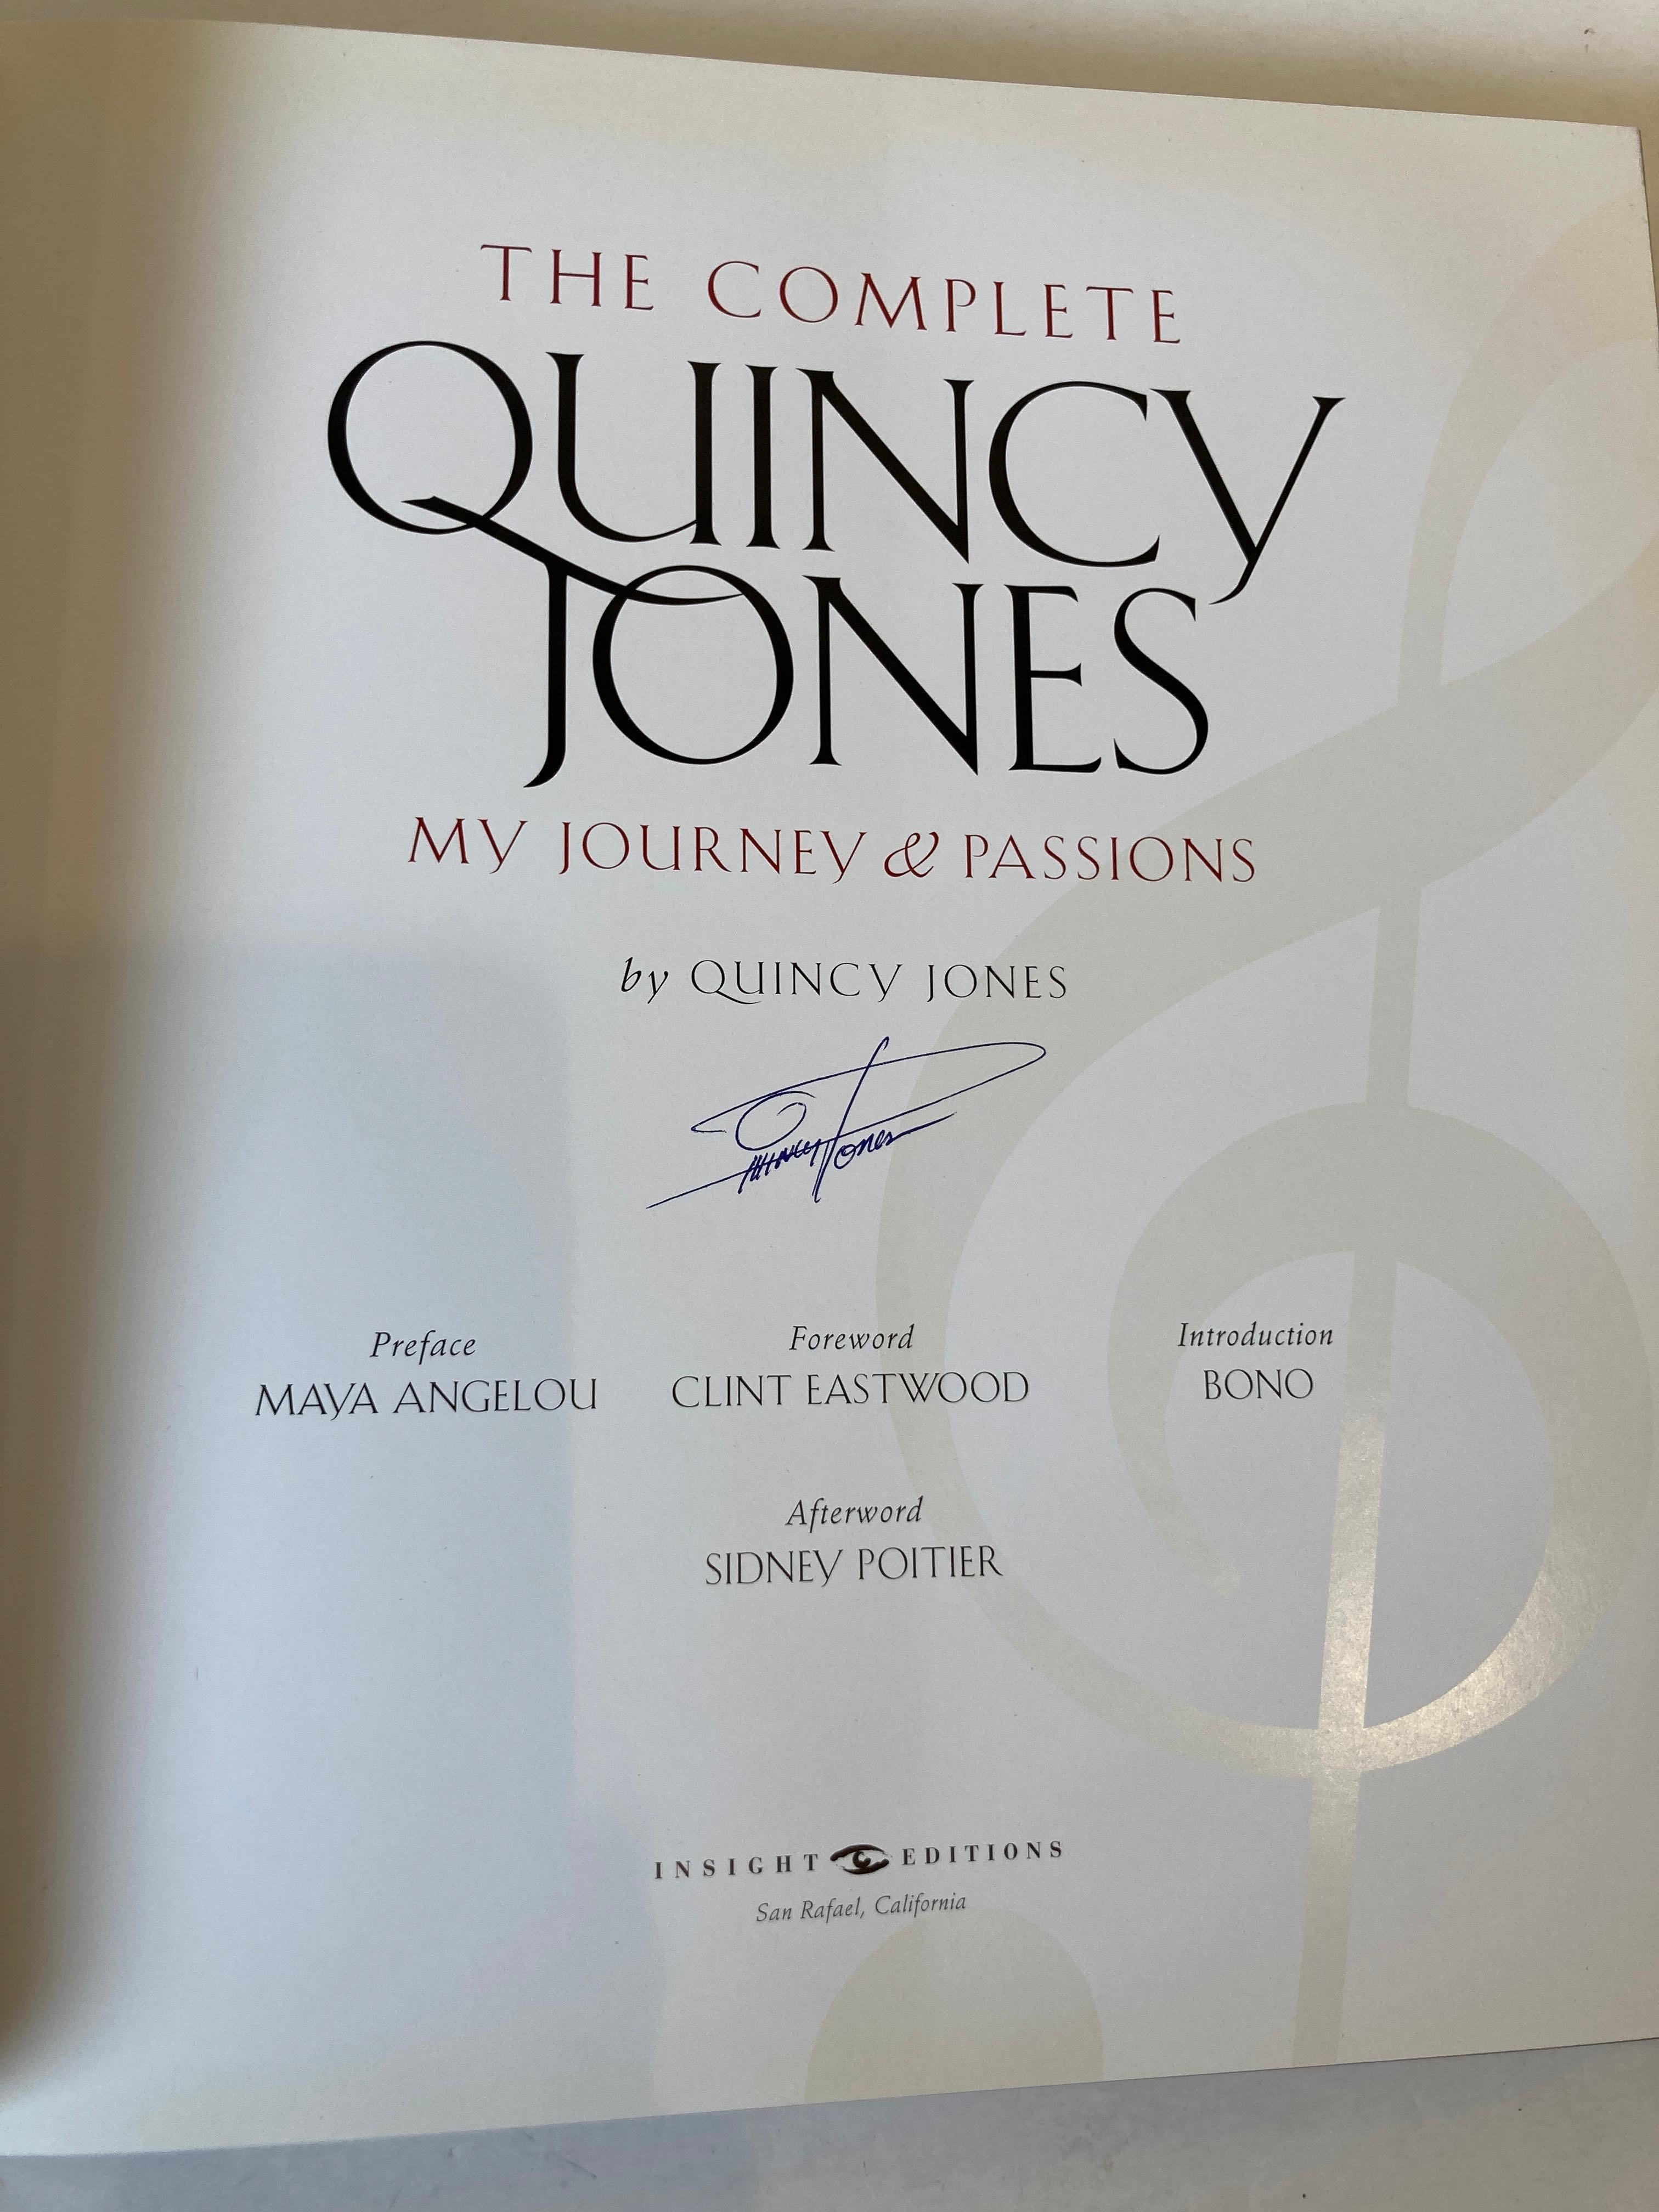 American The Complete Quincy Jones My Journey & Passions Hardcover Book For Sale